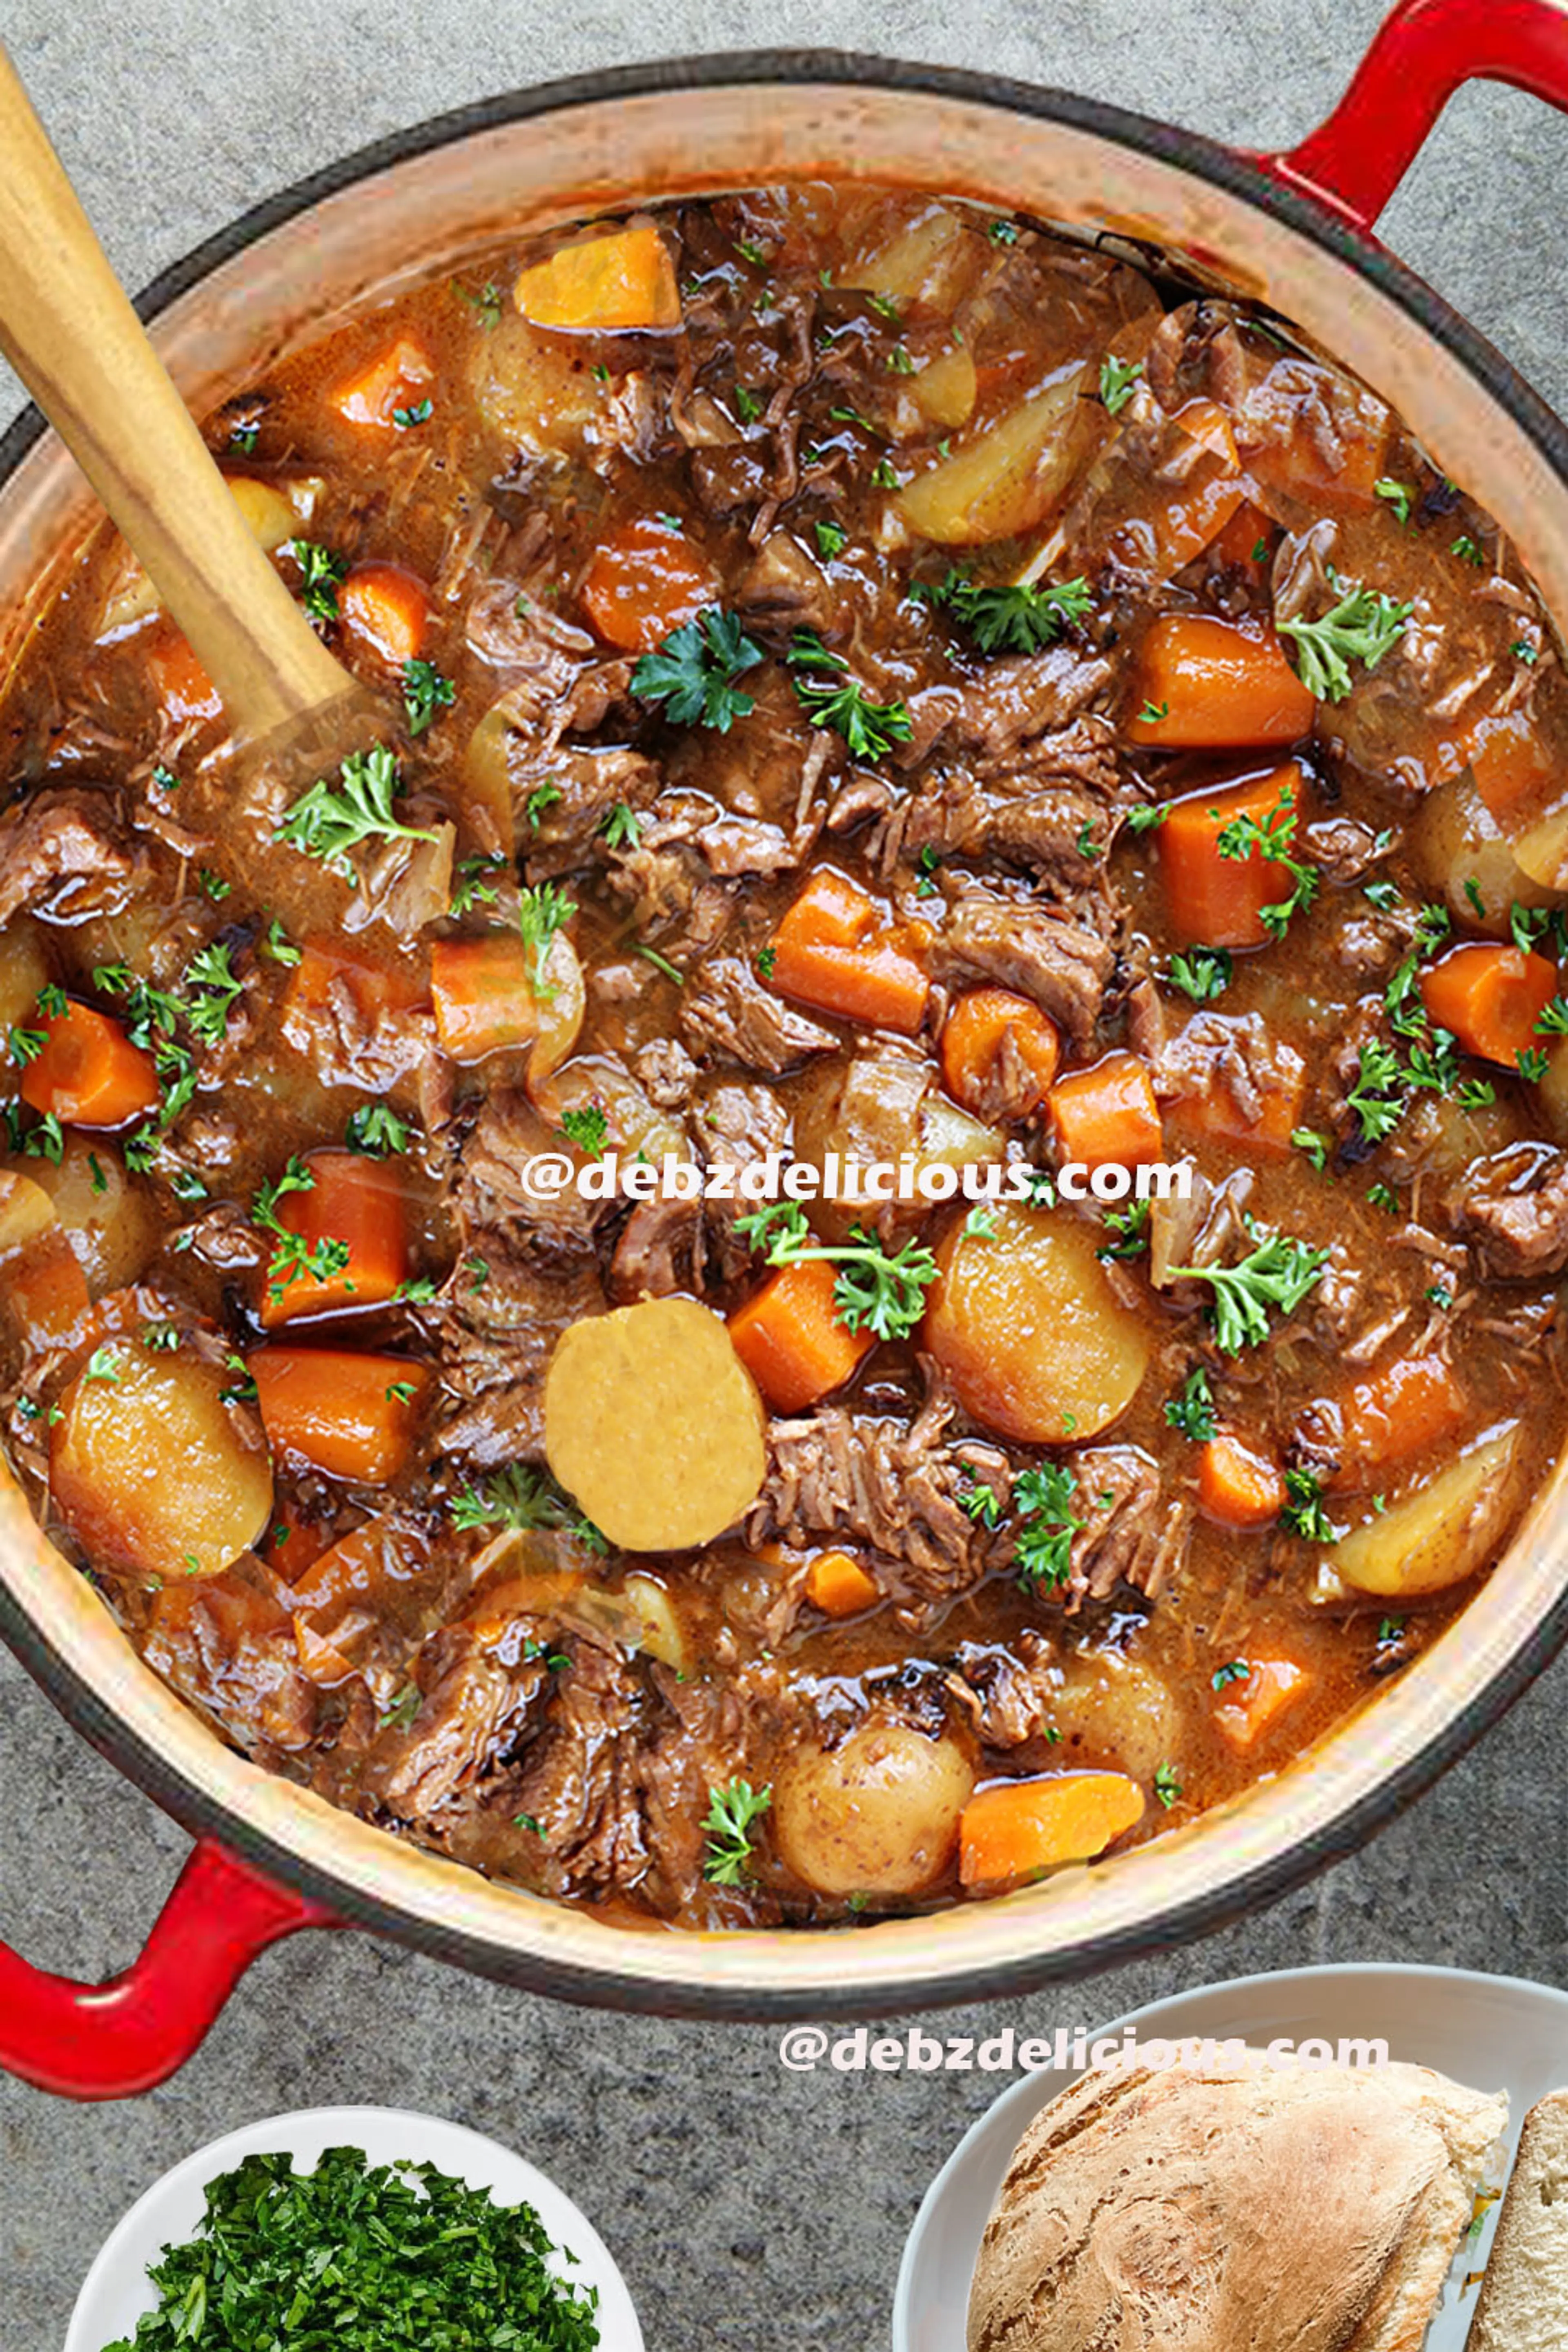 Beef Stew With Carrots And Potatoes, Dutch Oven Beef Stew